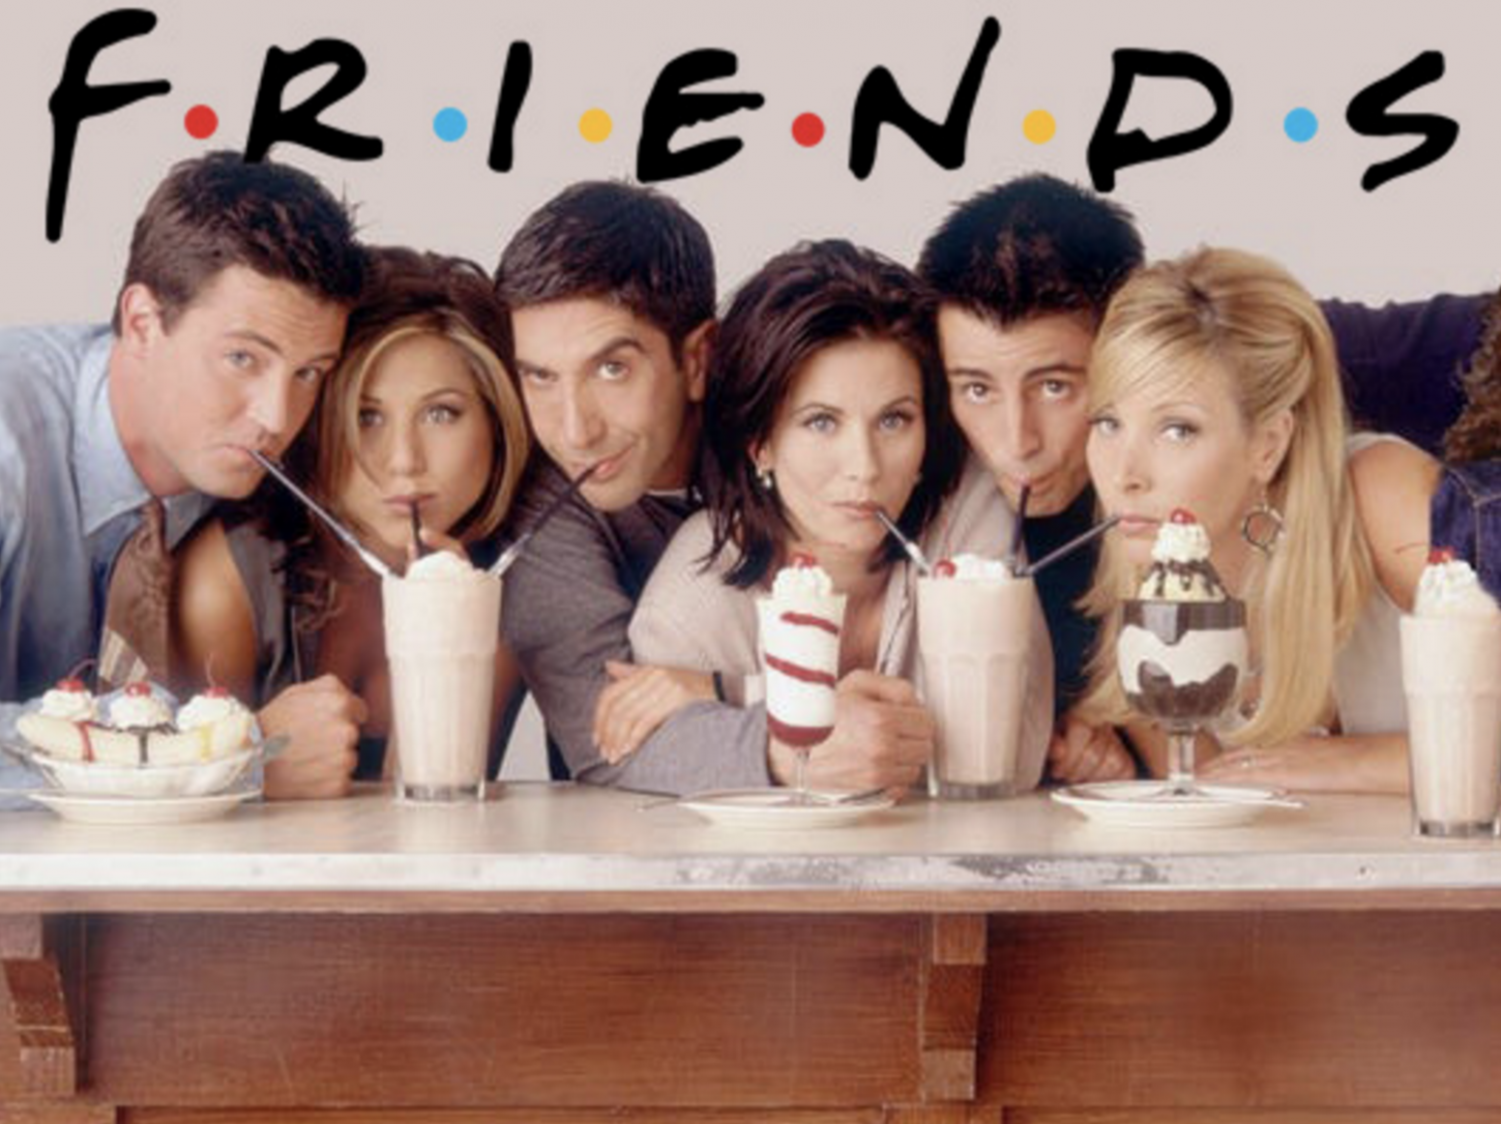 Friends' is the greatest TV show ever, study says - see the list